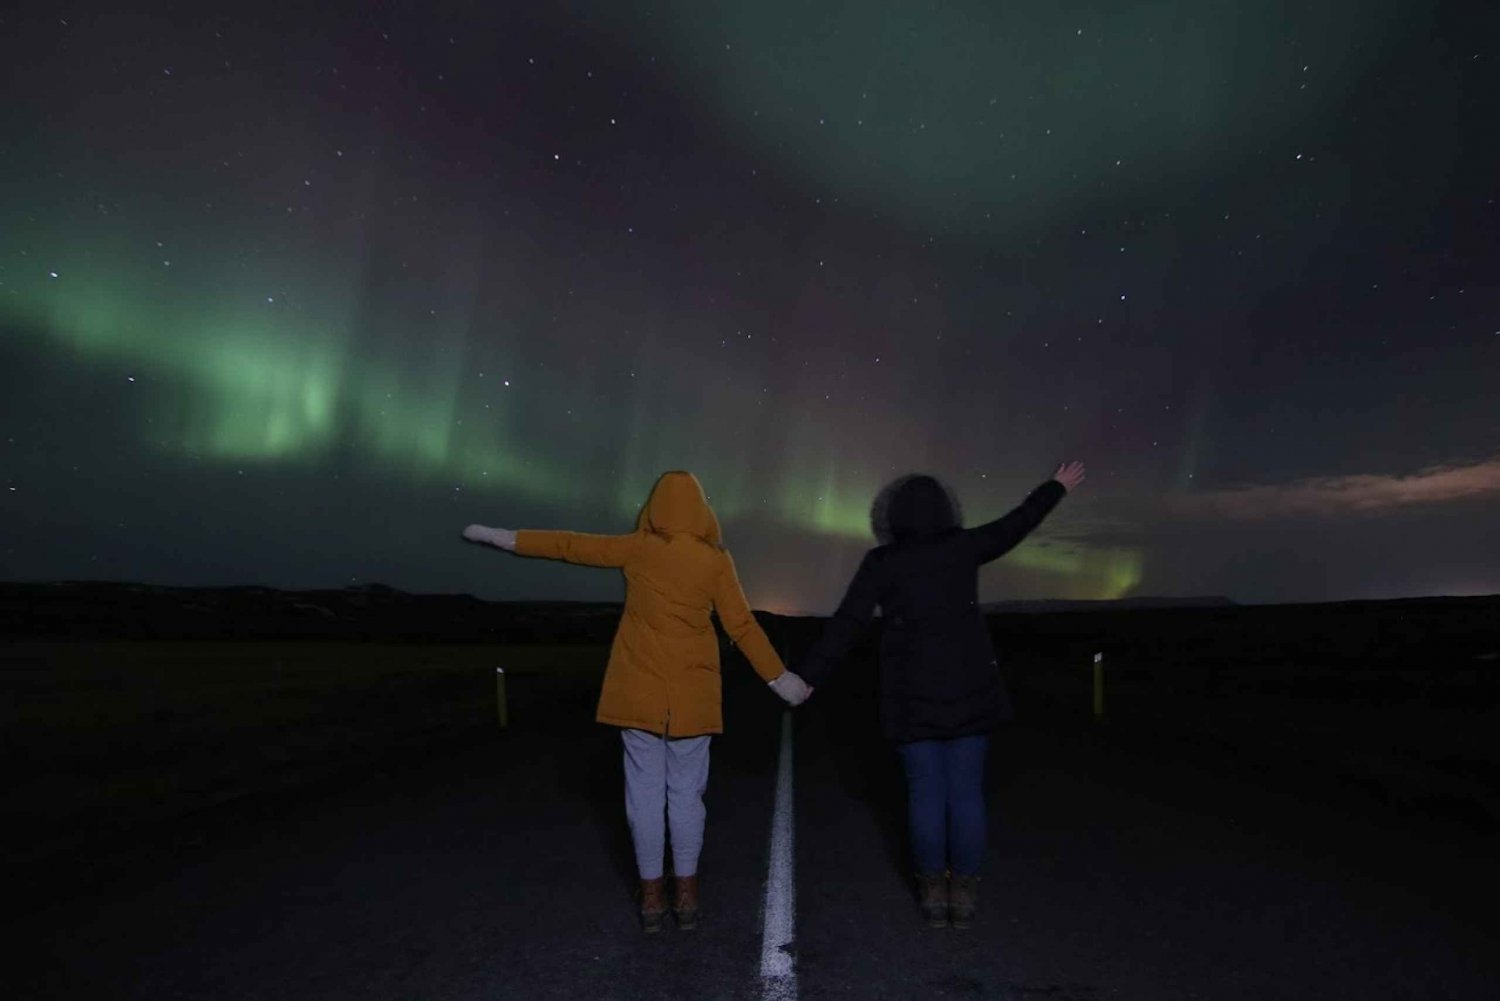 From Reykjavik: Northern Lights Tour with Hot Cocoa & Photos